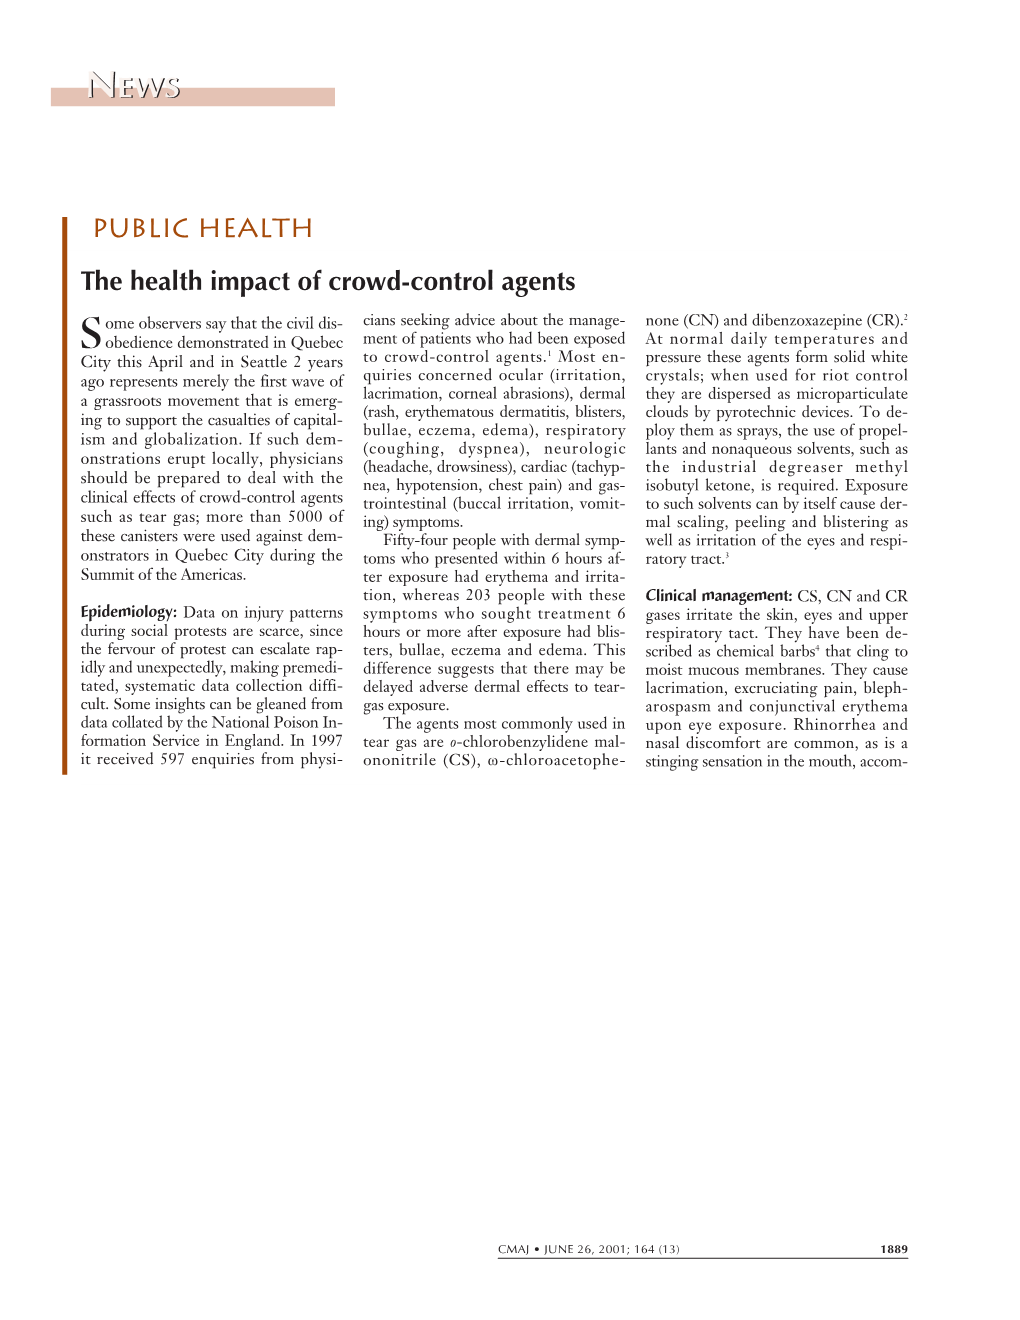 The Health Impact of Crowd-Control Agents